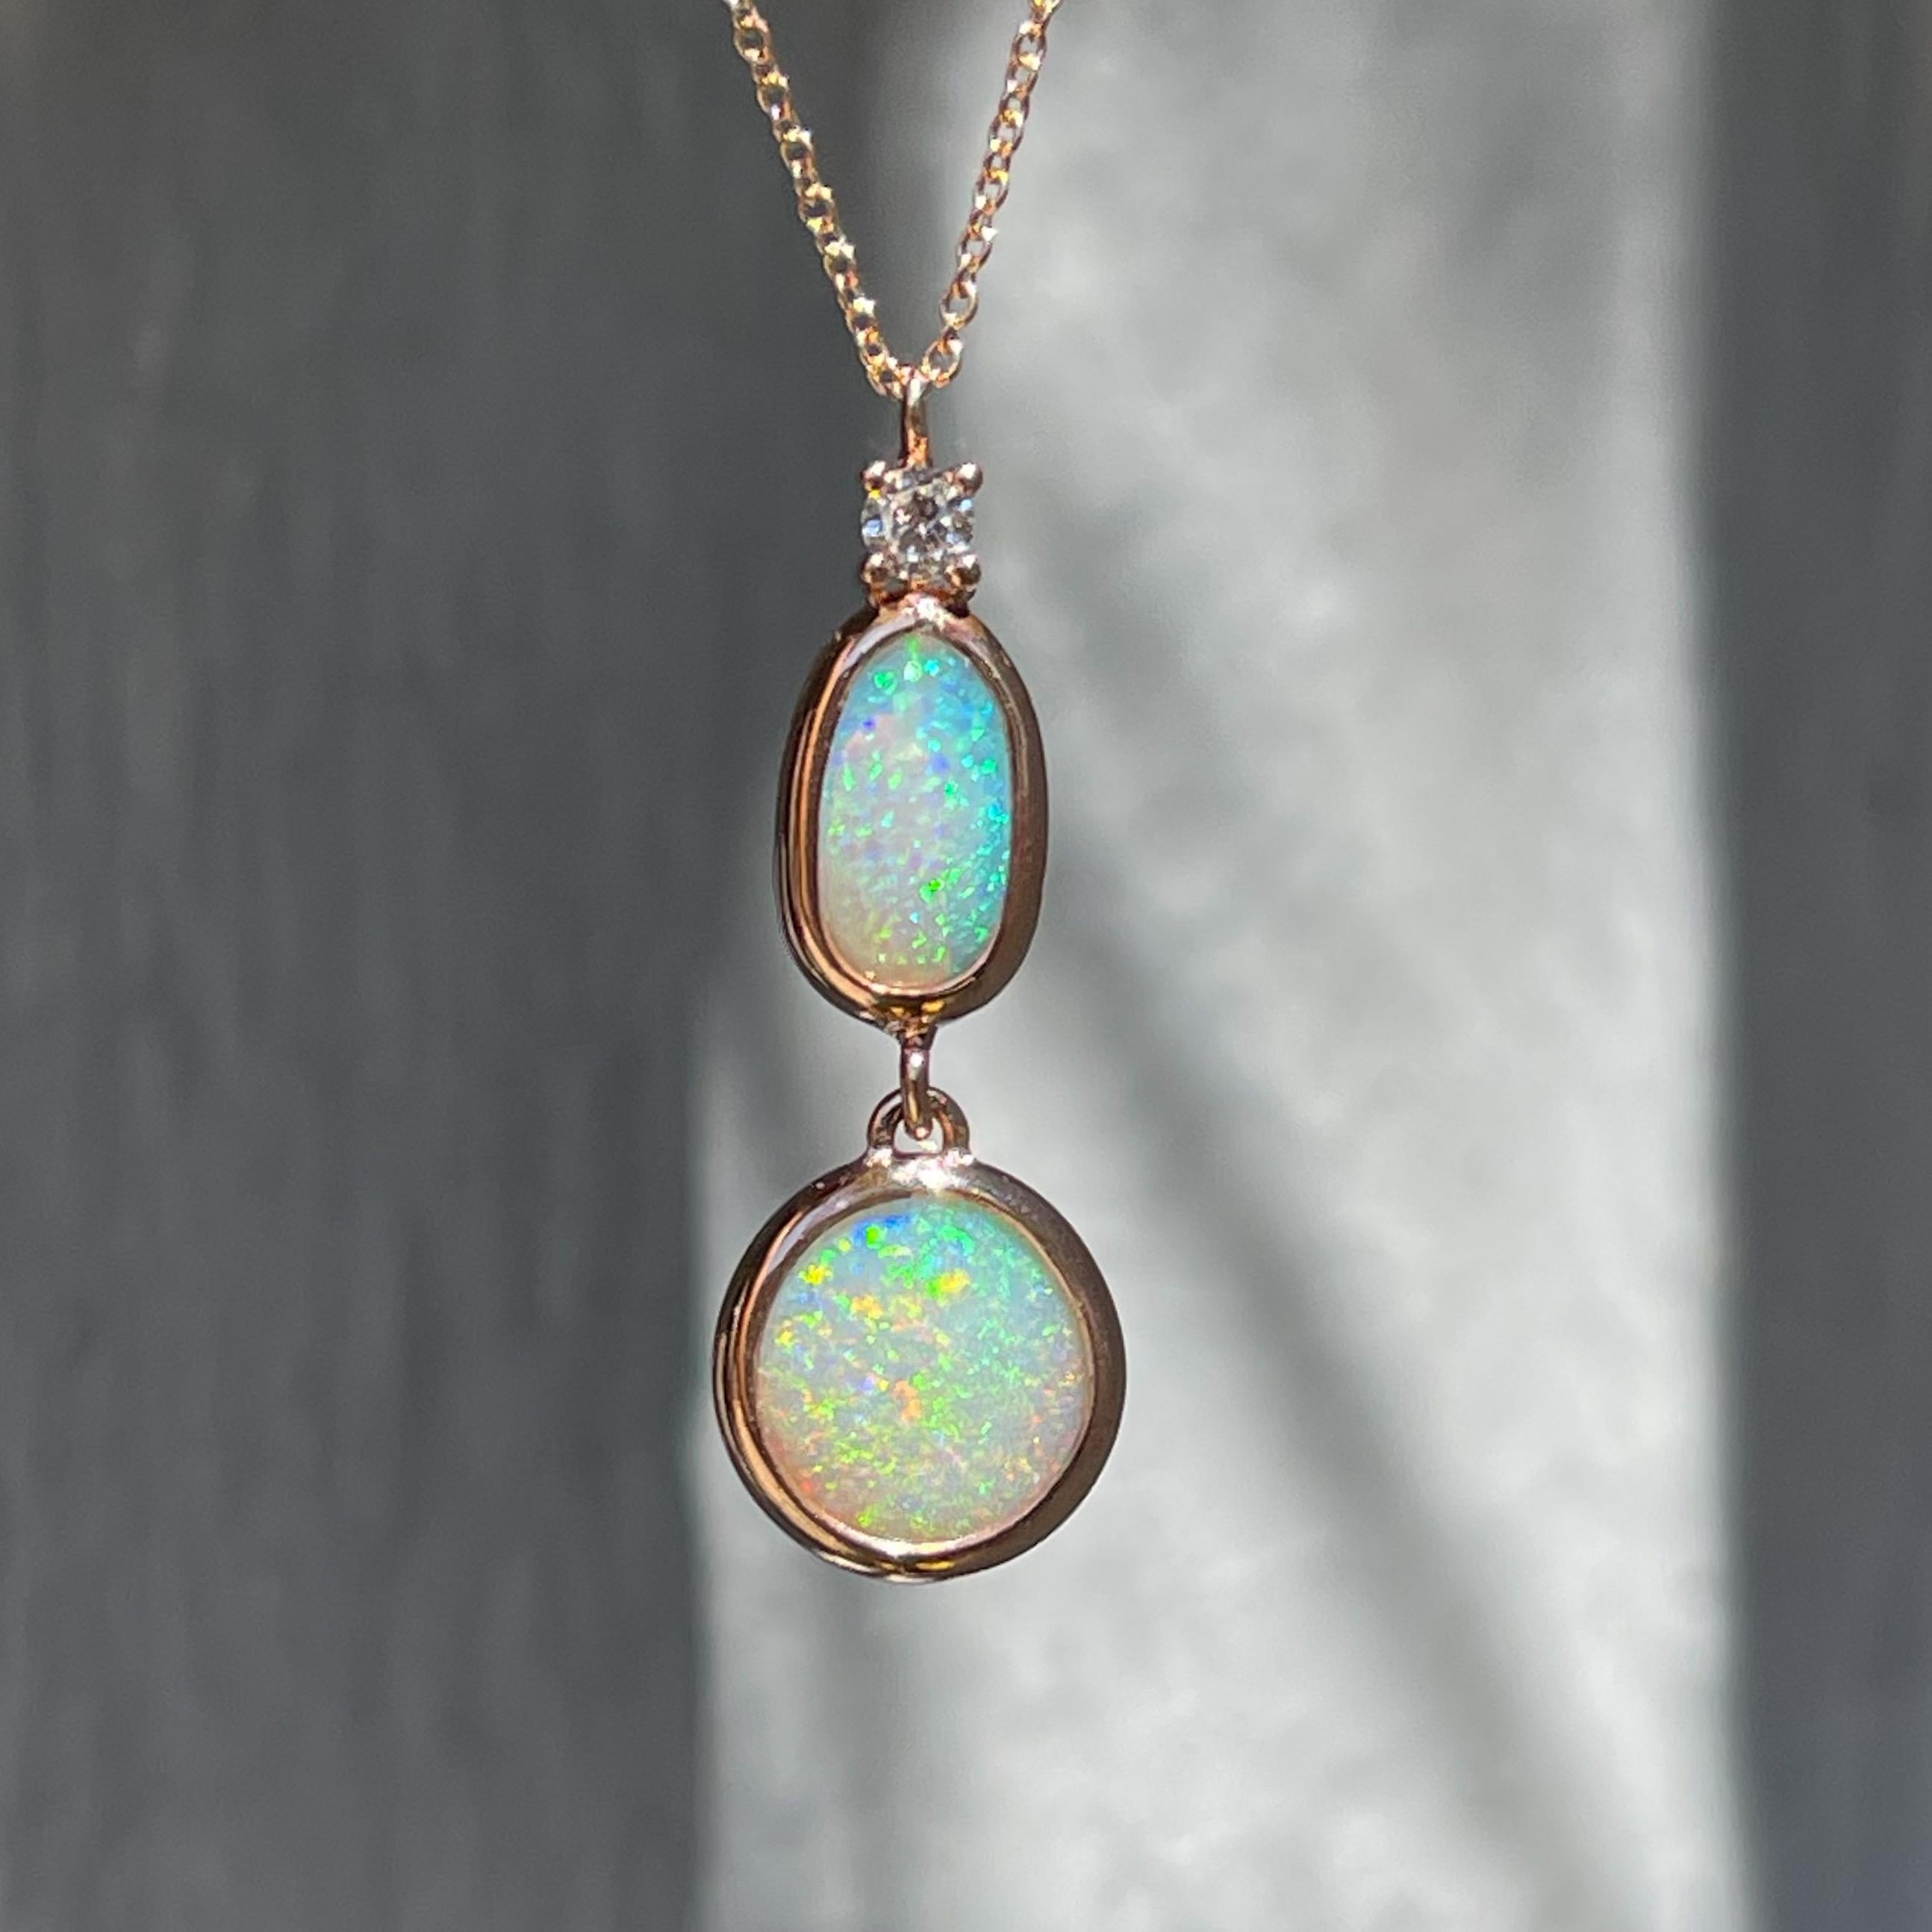 Lightning Ridge Opals oscillate with grace in this Australian Opal Necklace. Bezel set in rose gold, the opal pendant balances three visually weighted gems. Perched at the top is a sparkling diamond from which the pendant hinges. Affixed to this